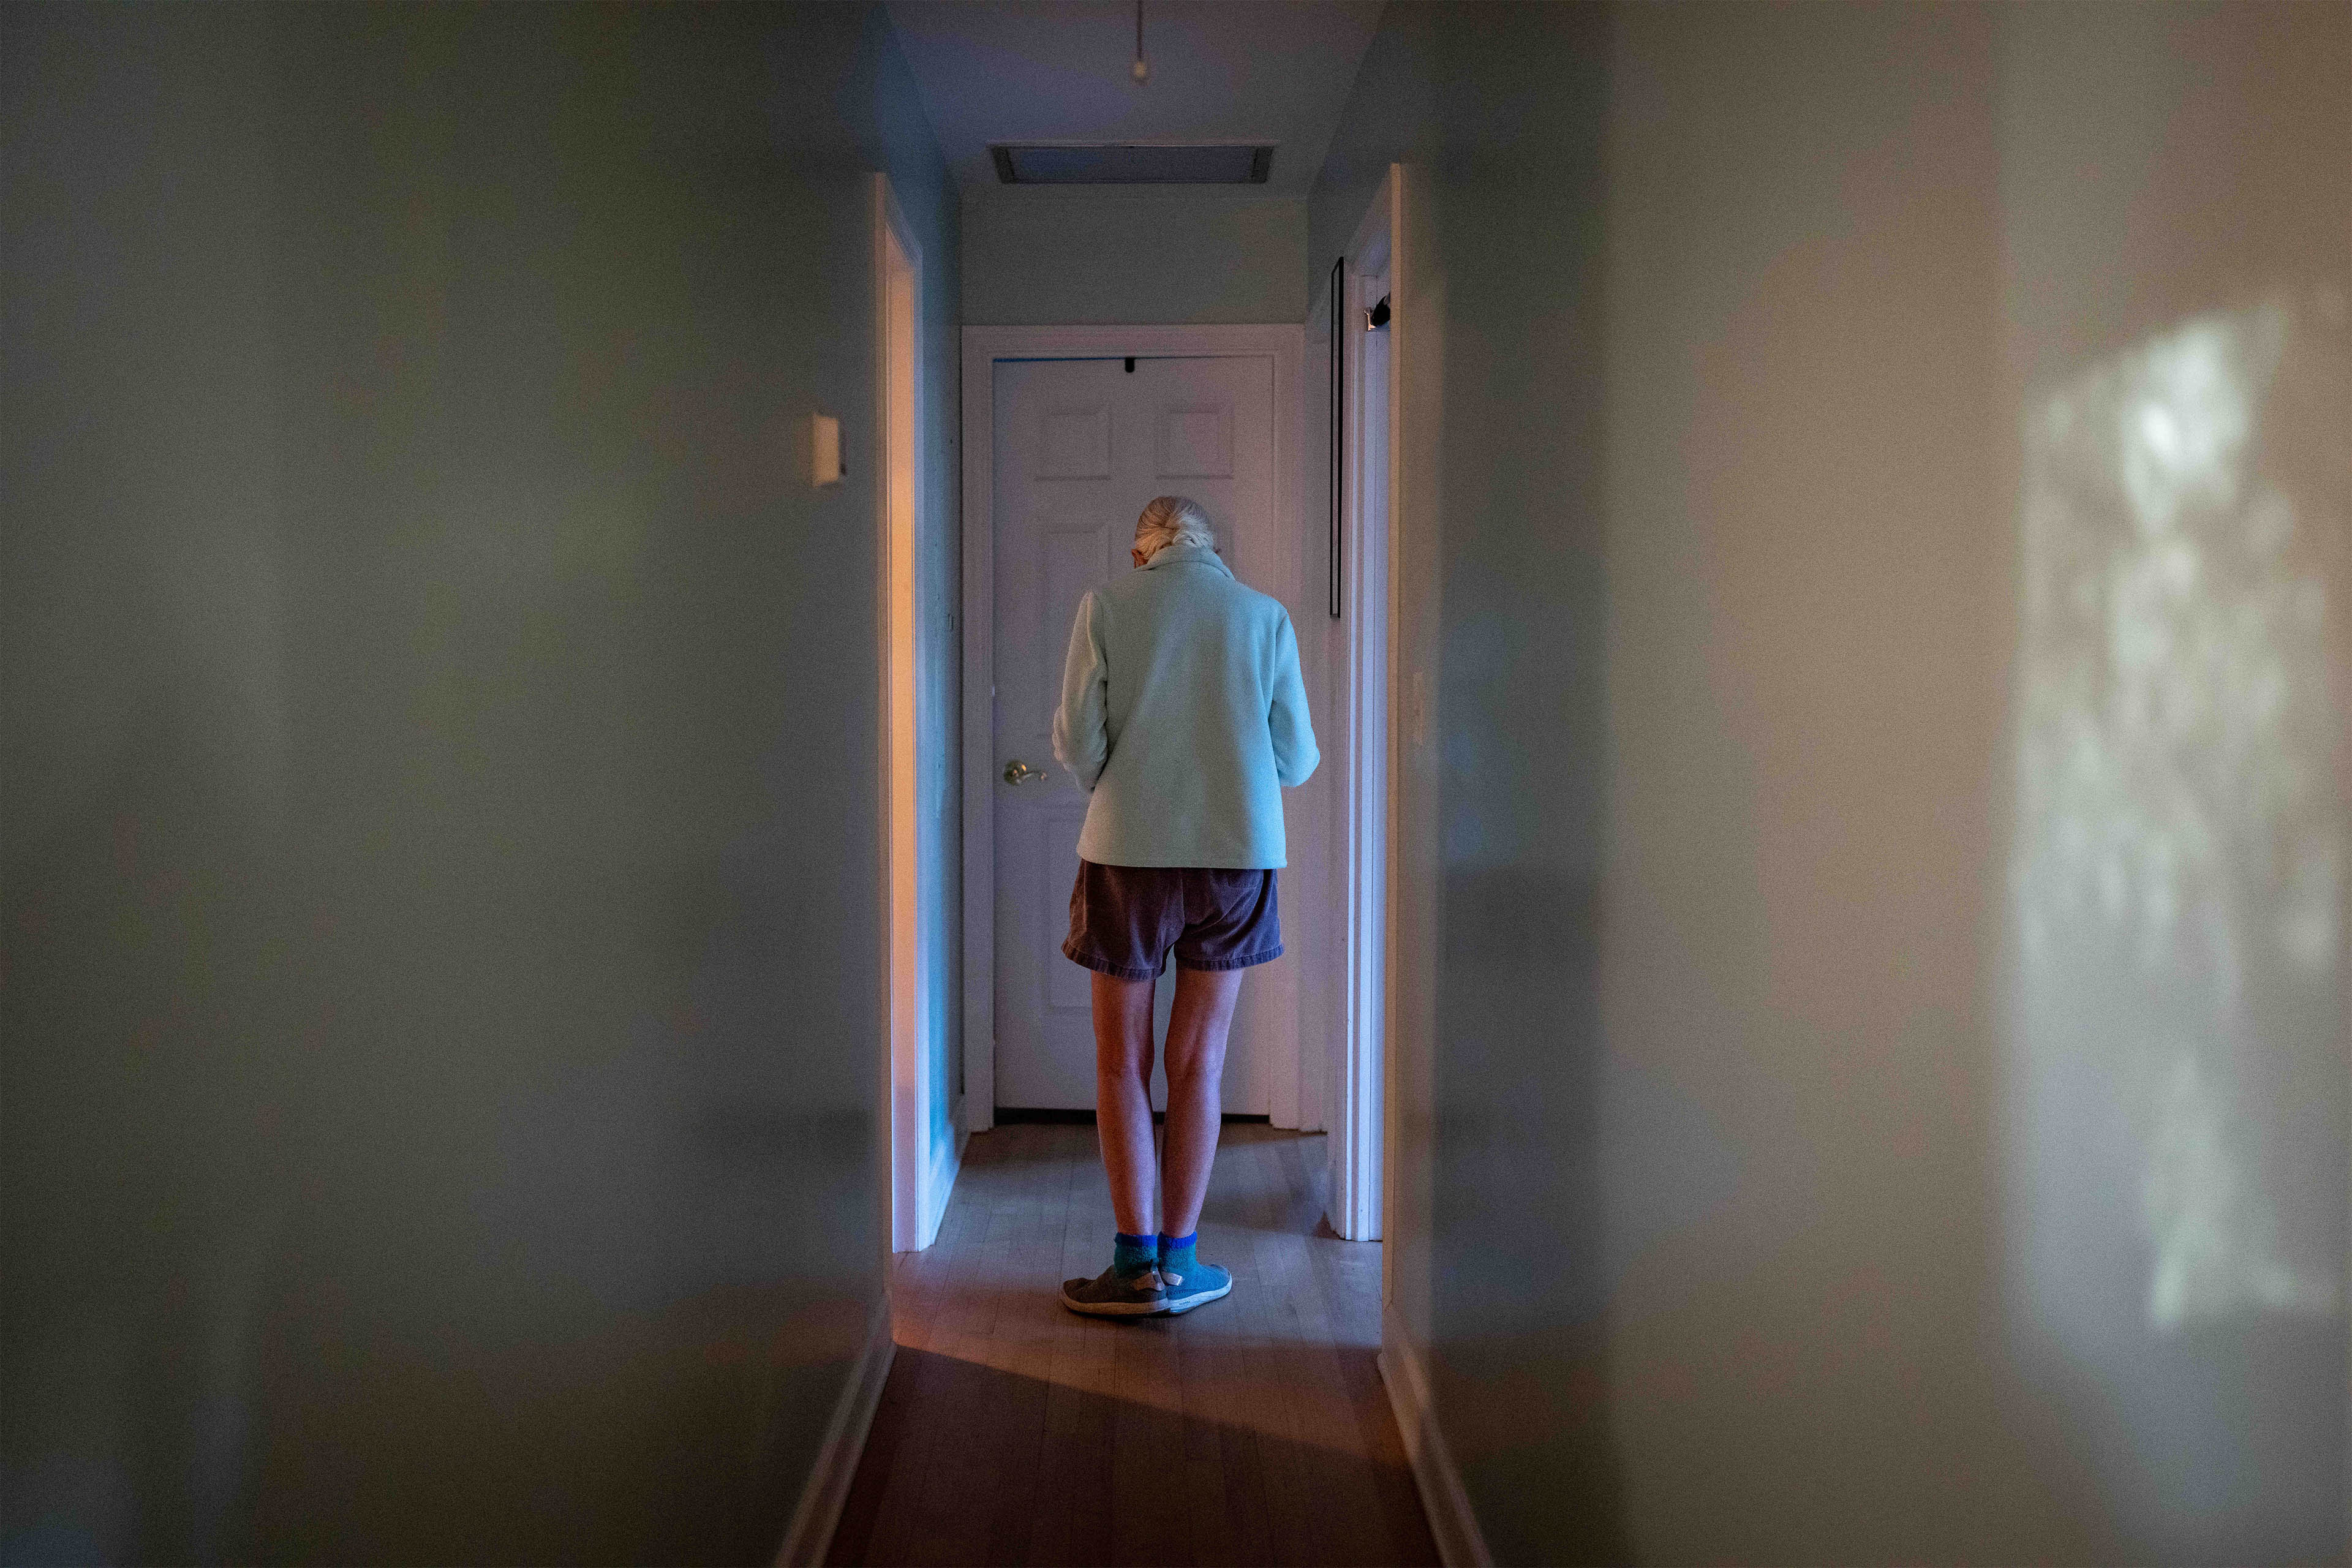 A photo of an elderly woman walking down a hallway indoors.